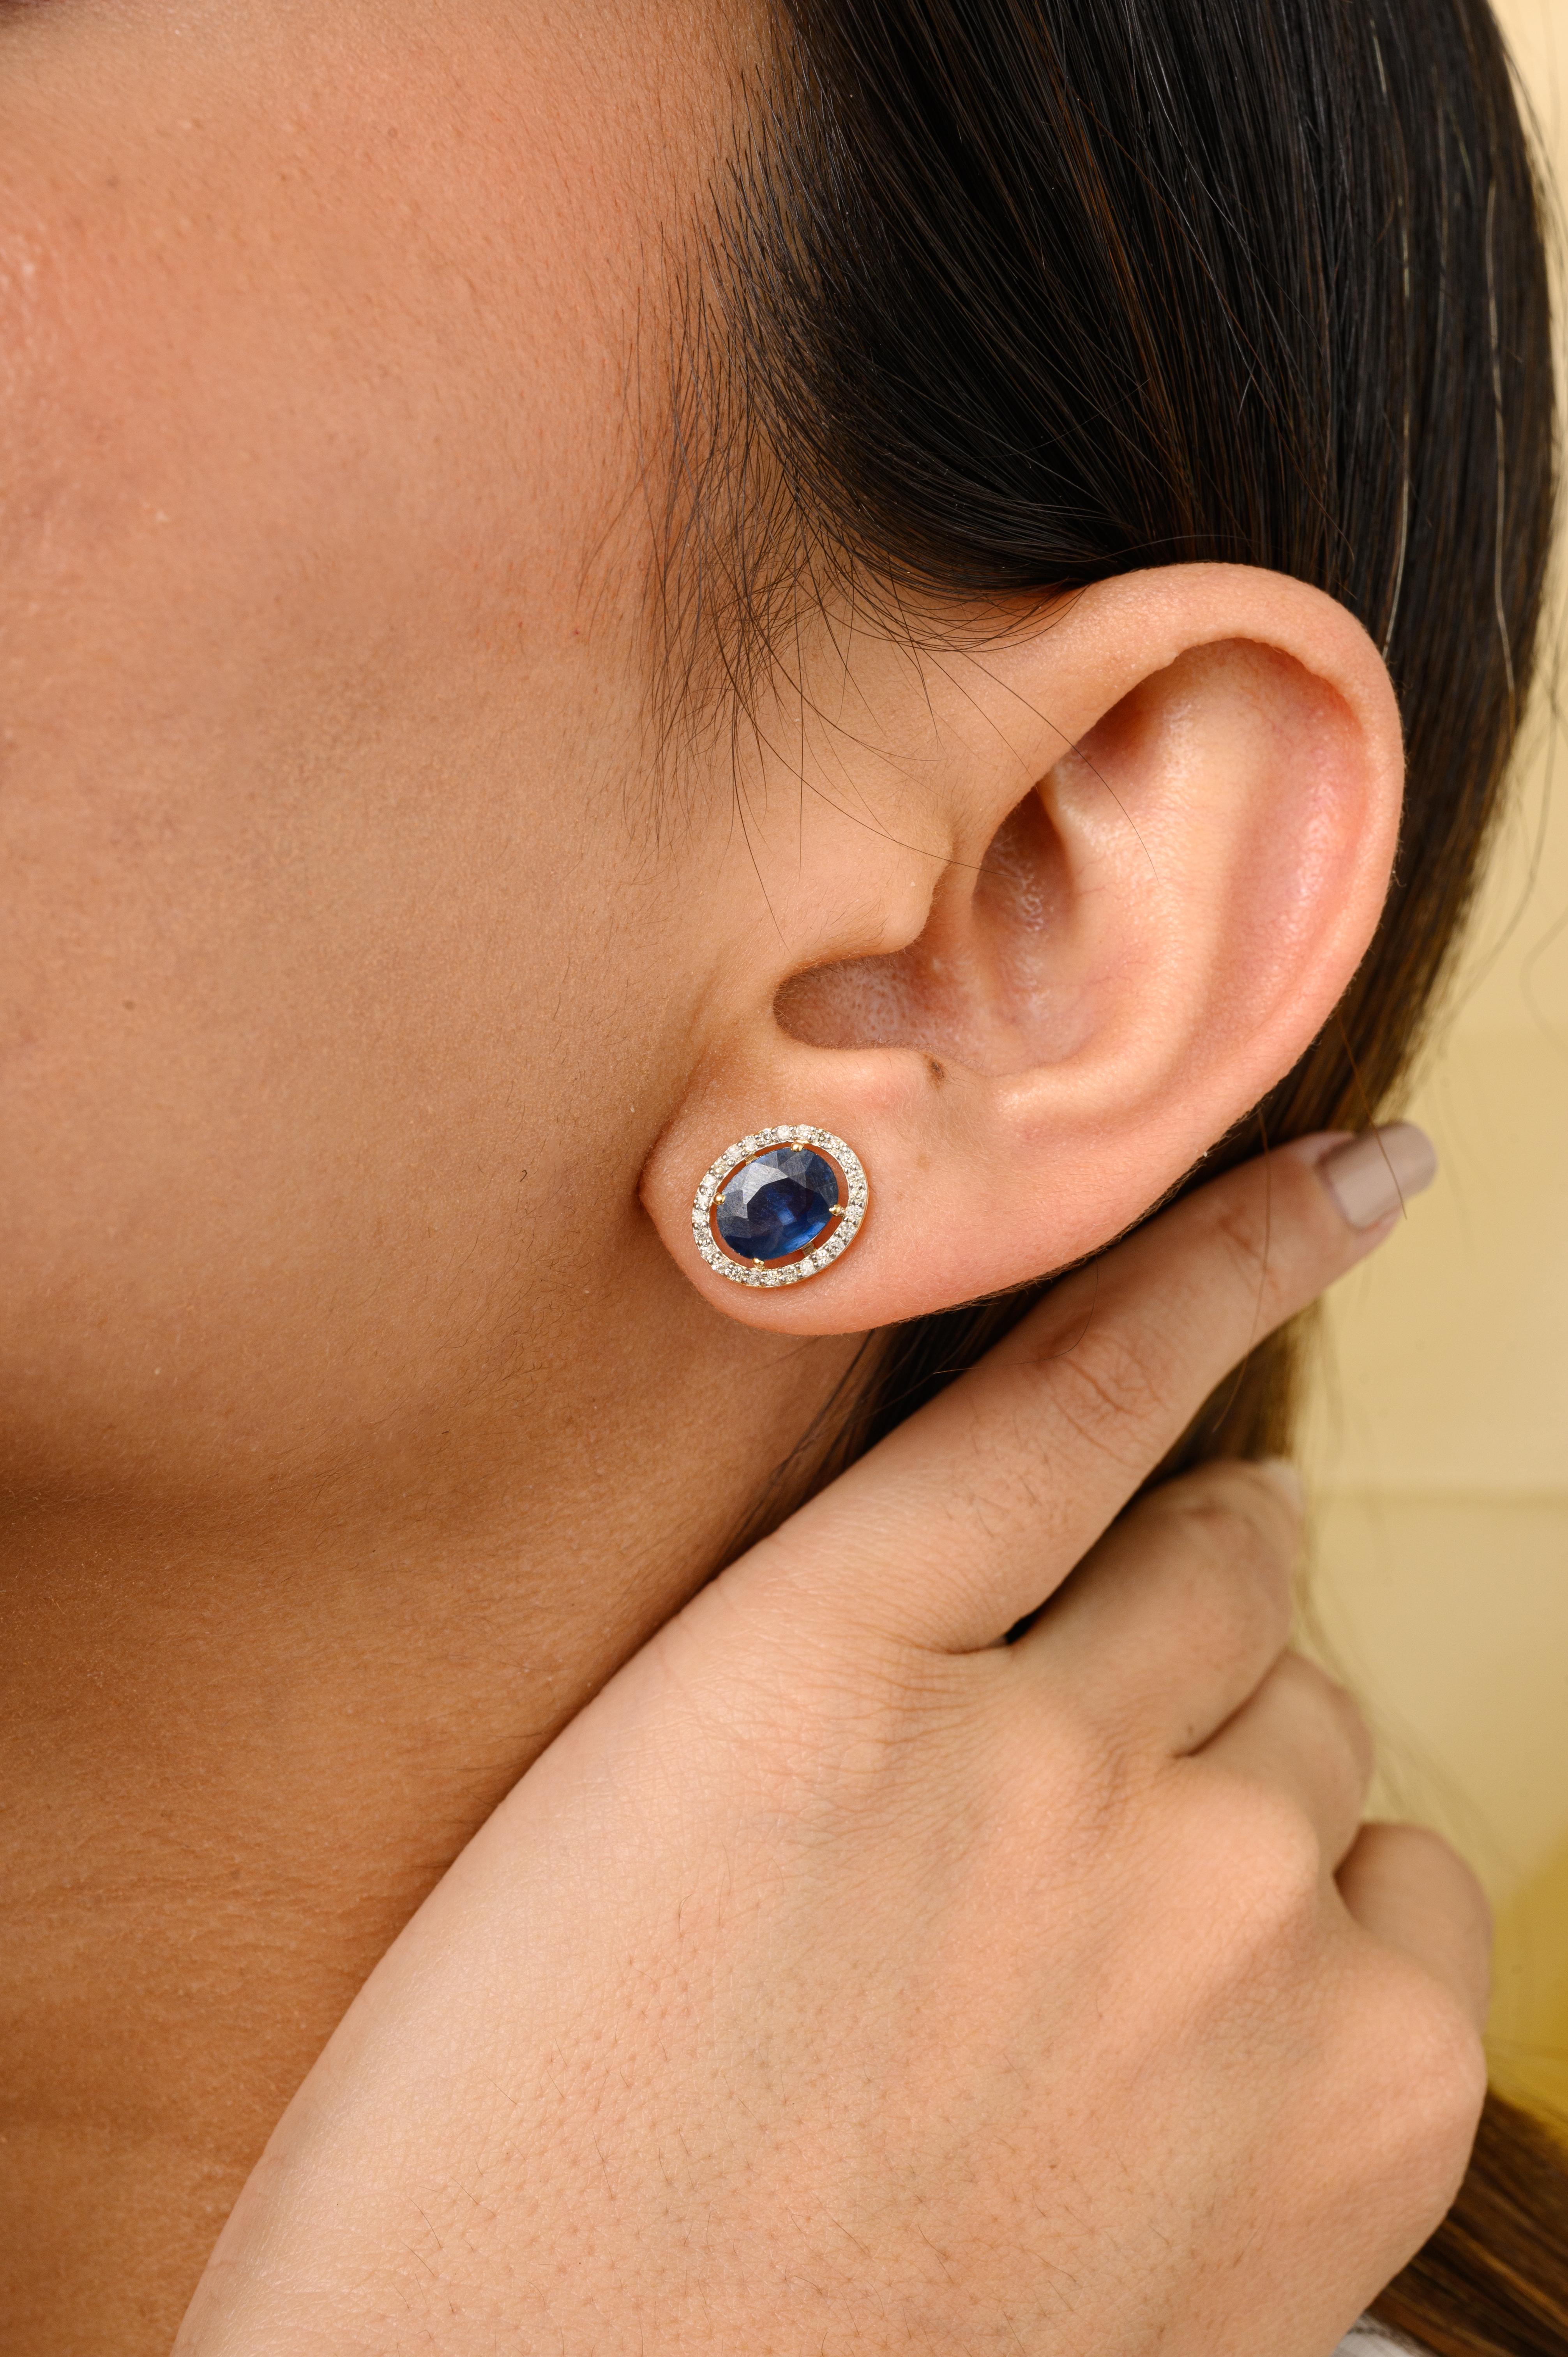 Deep Blue Sapphire Diamond Halo Stud Earrings in 14K Gold to make a statement with your look. You shall need stud earrings to make a statement with your look. These earrings create a sparkling, luxurious look featuring oval cut blue sapphire and